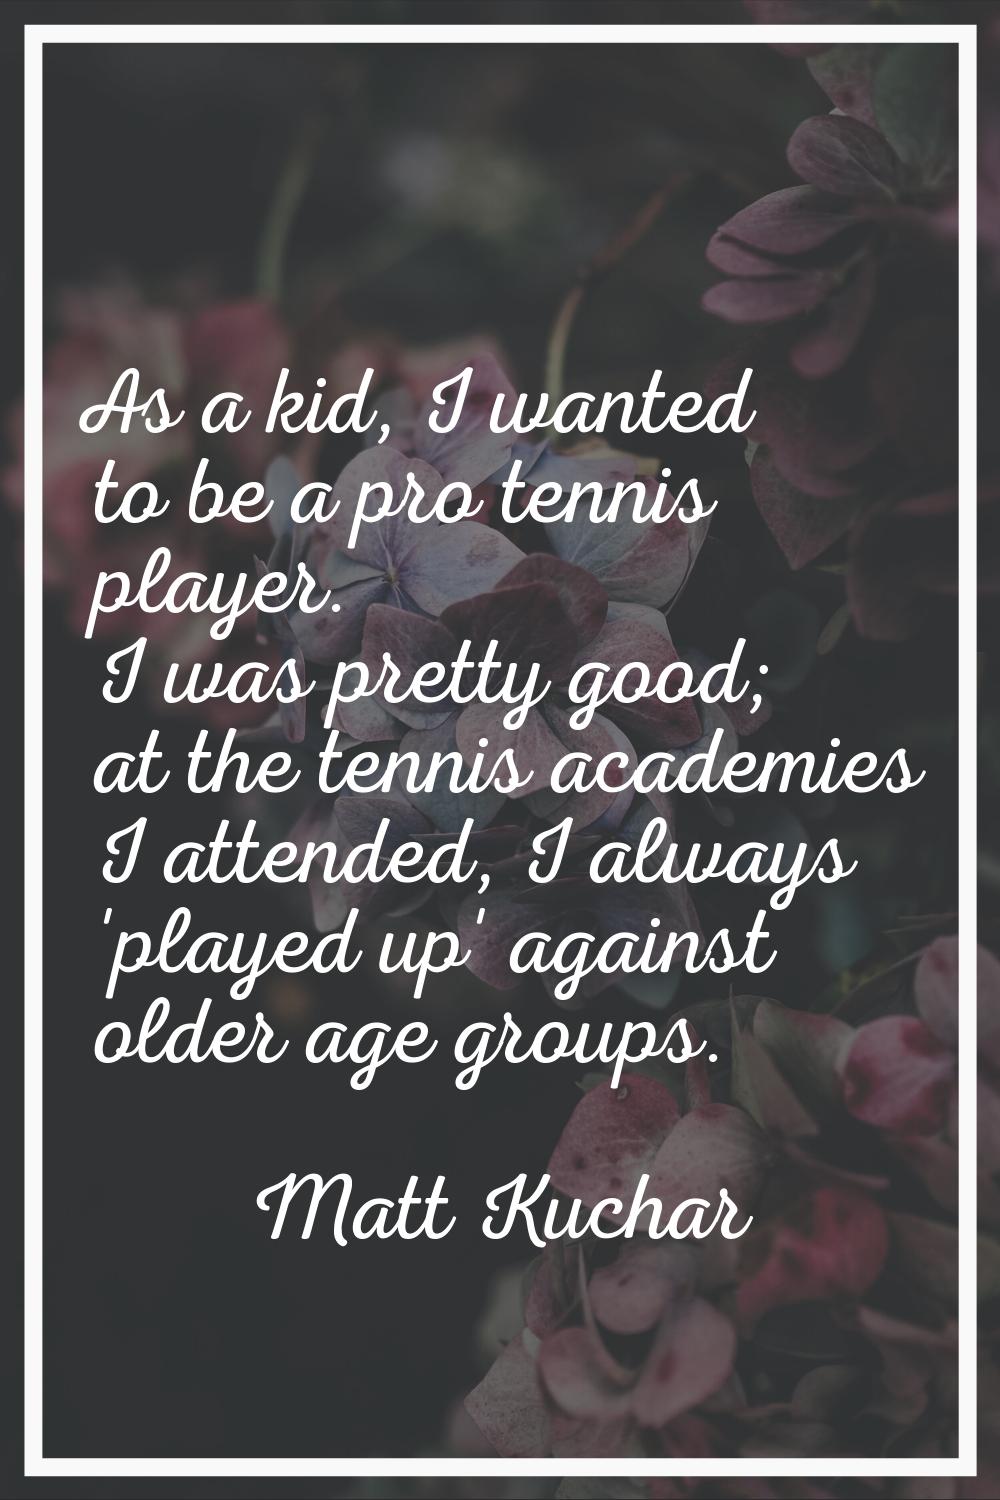 As a kid, I wanted to be a pro tennis player. I was pretty good; at the tennis academies I attended